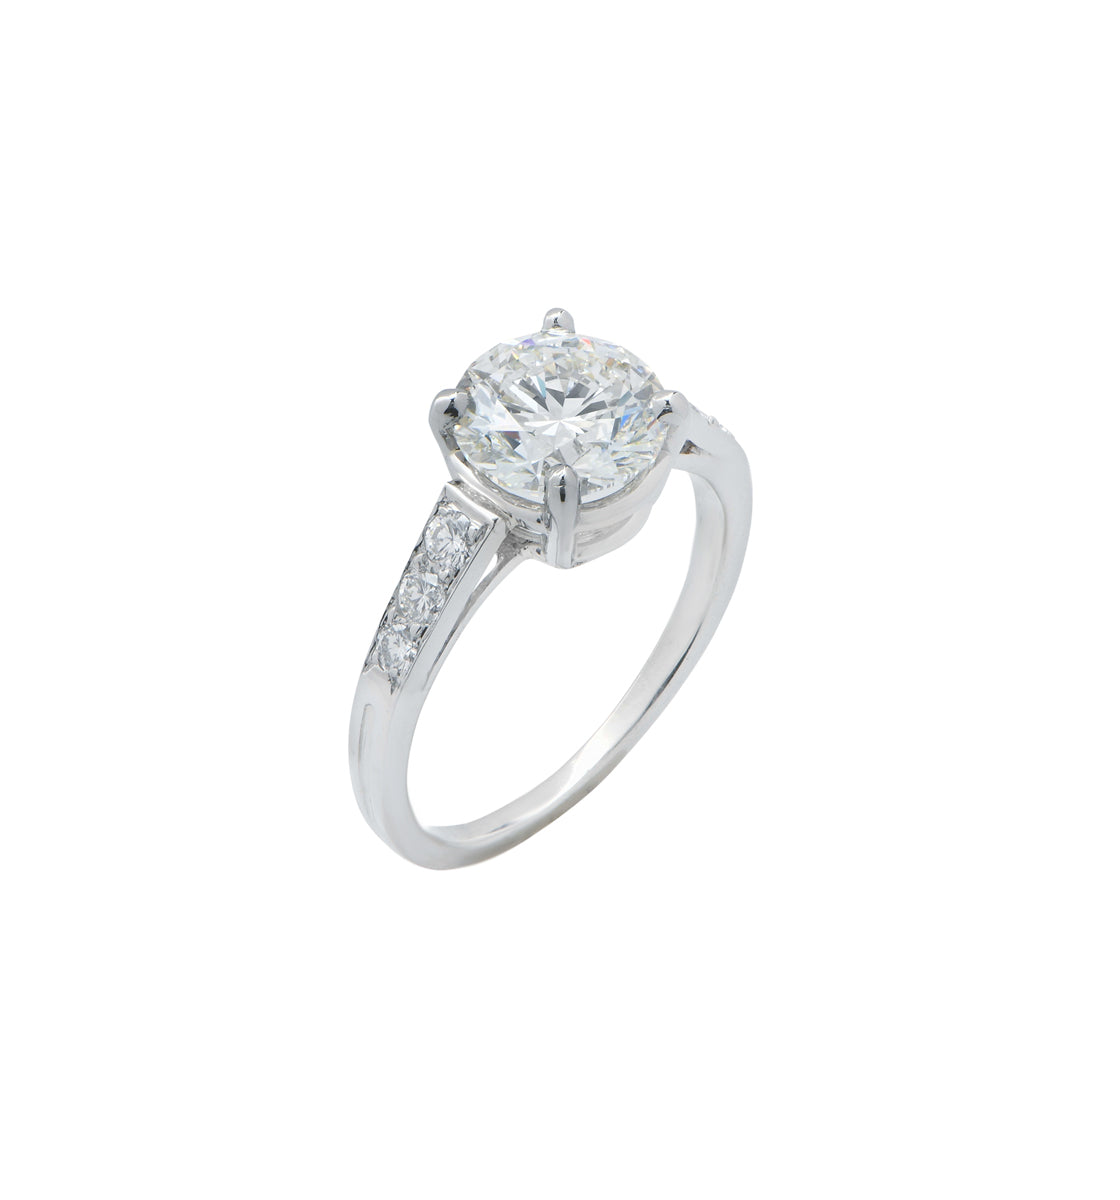 Engagement ring miami and coral gables, diamond miami coral gables